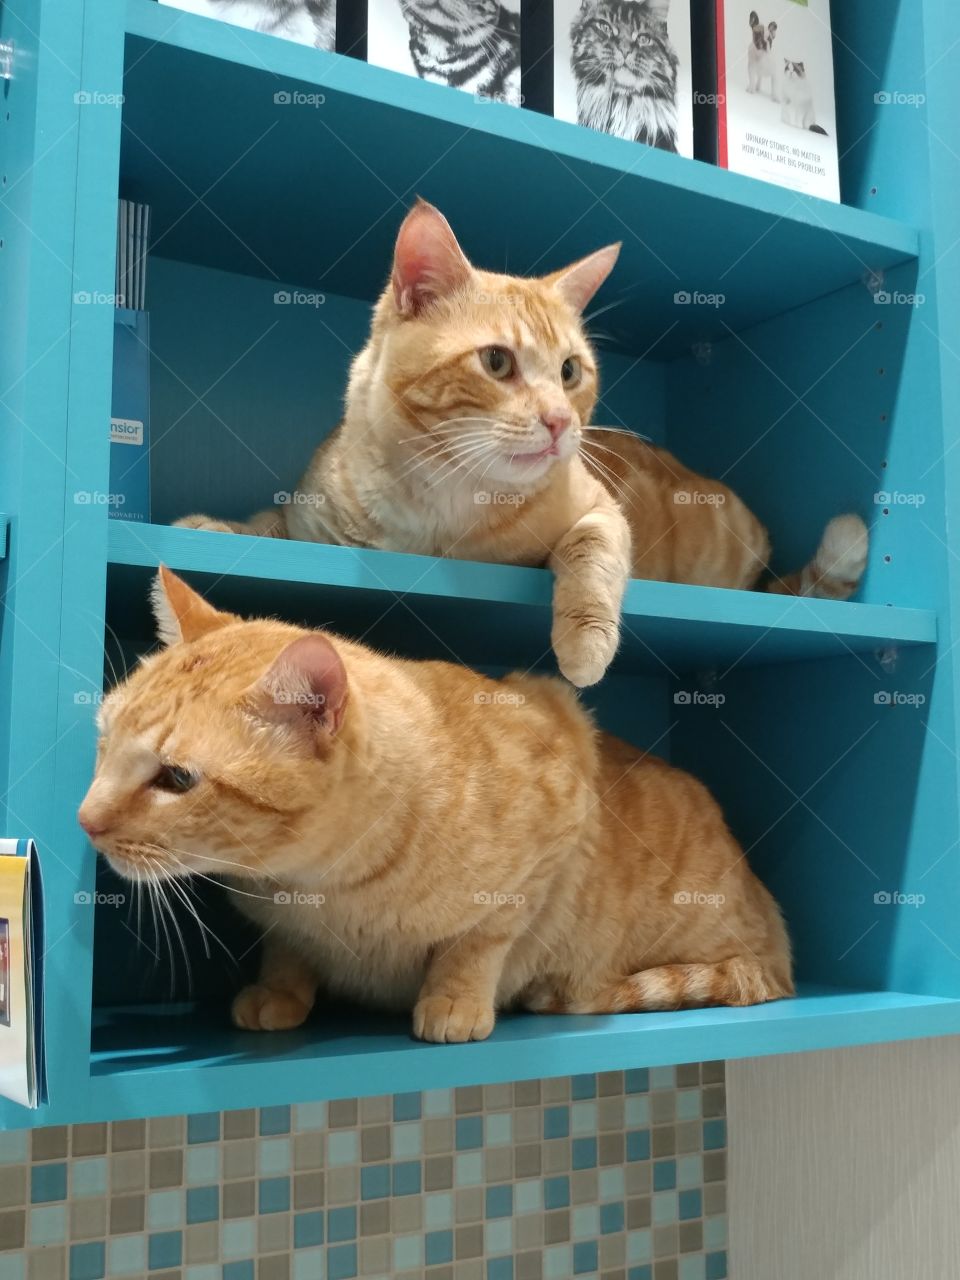 Two orange tabbys looking around to,see if the cost is clear at the veterinary office.